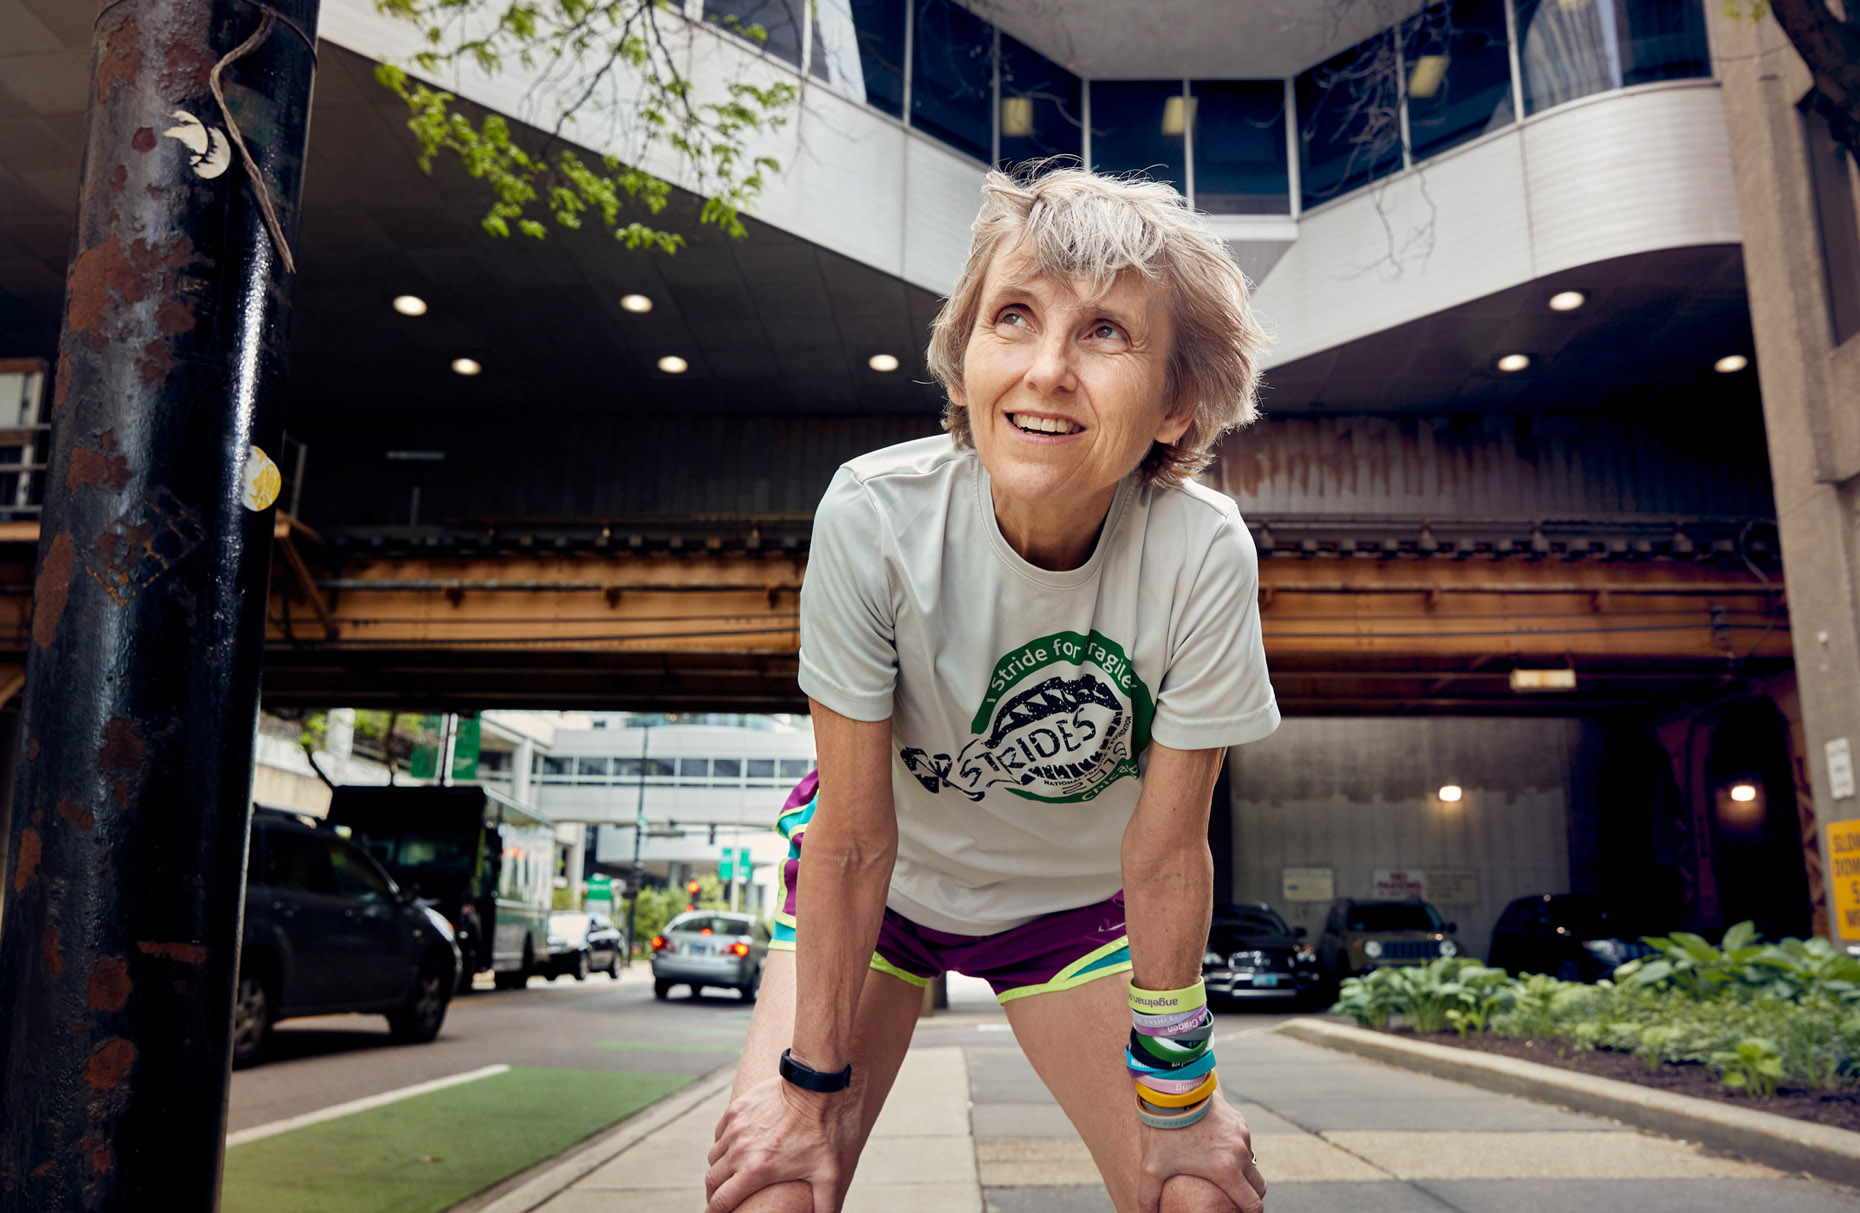 Older runner recovering on city street | lifestyle photography by Saverio Truglia